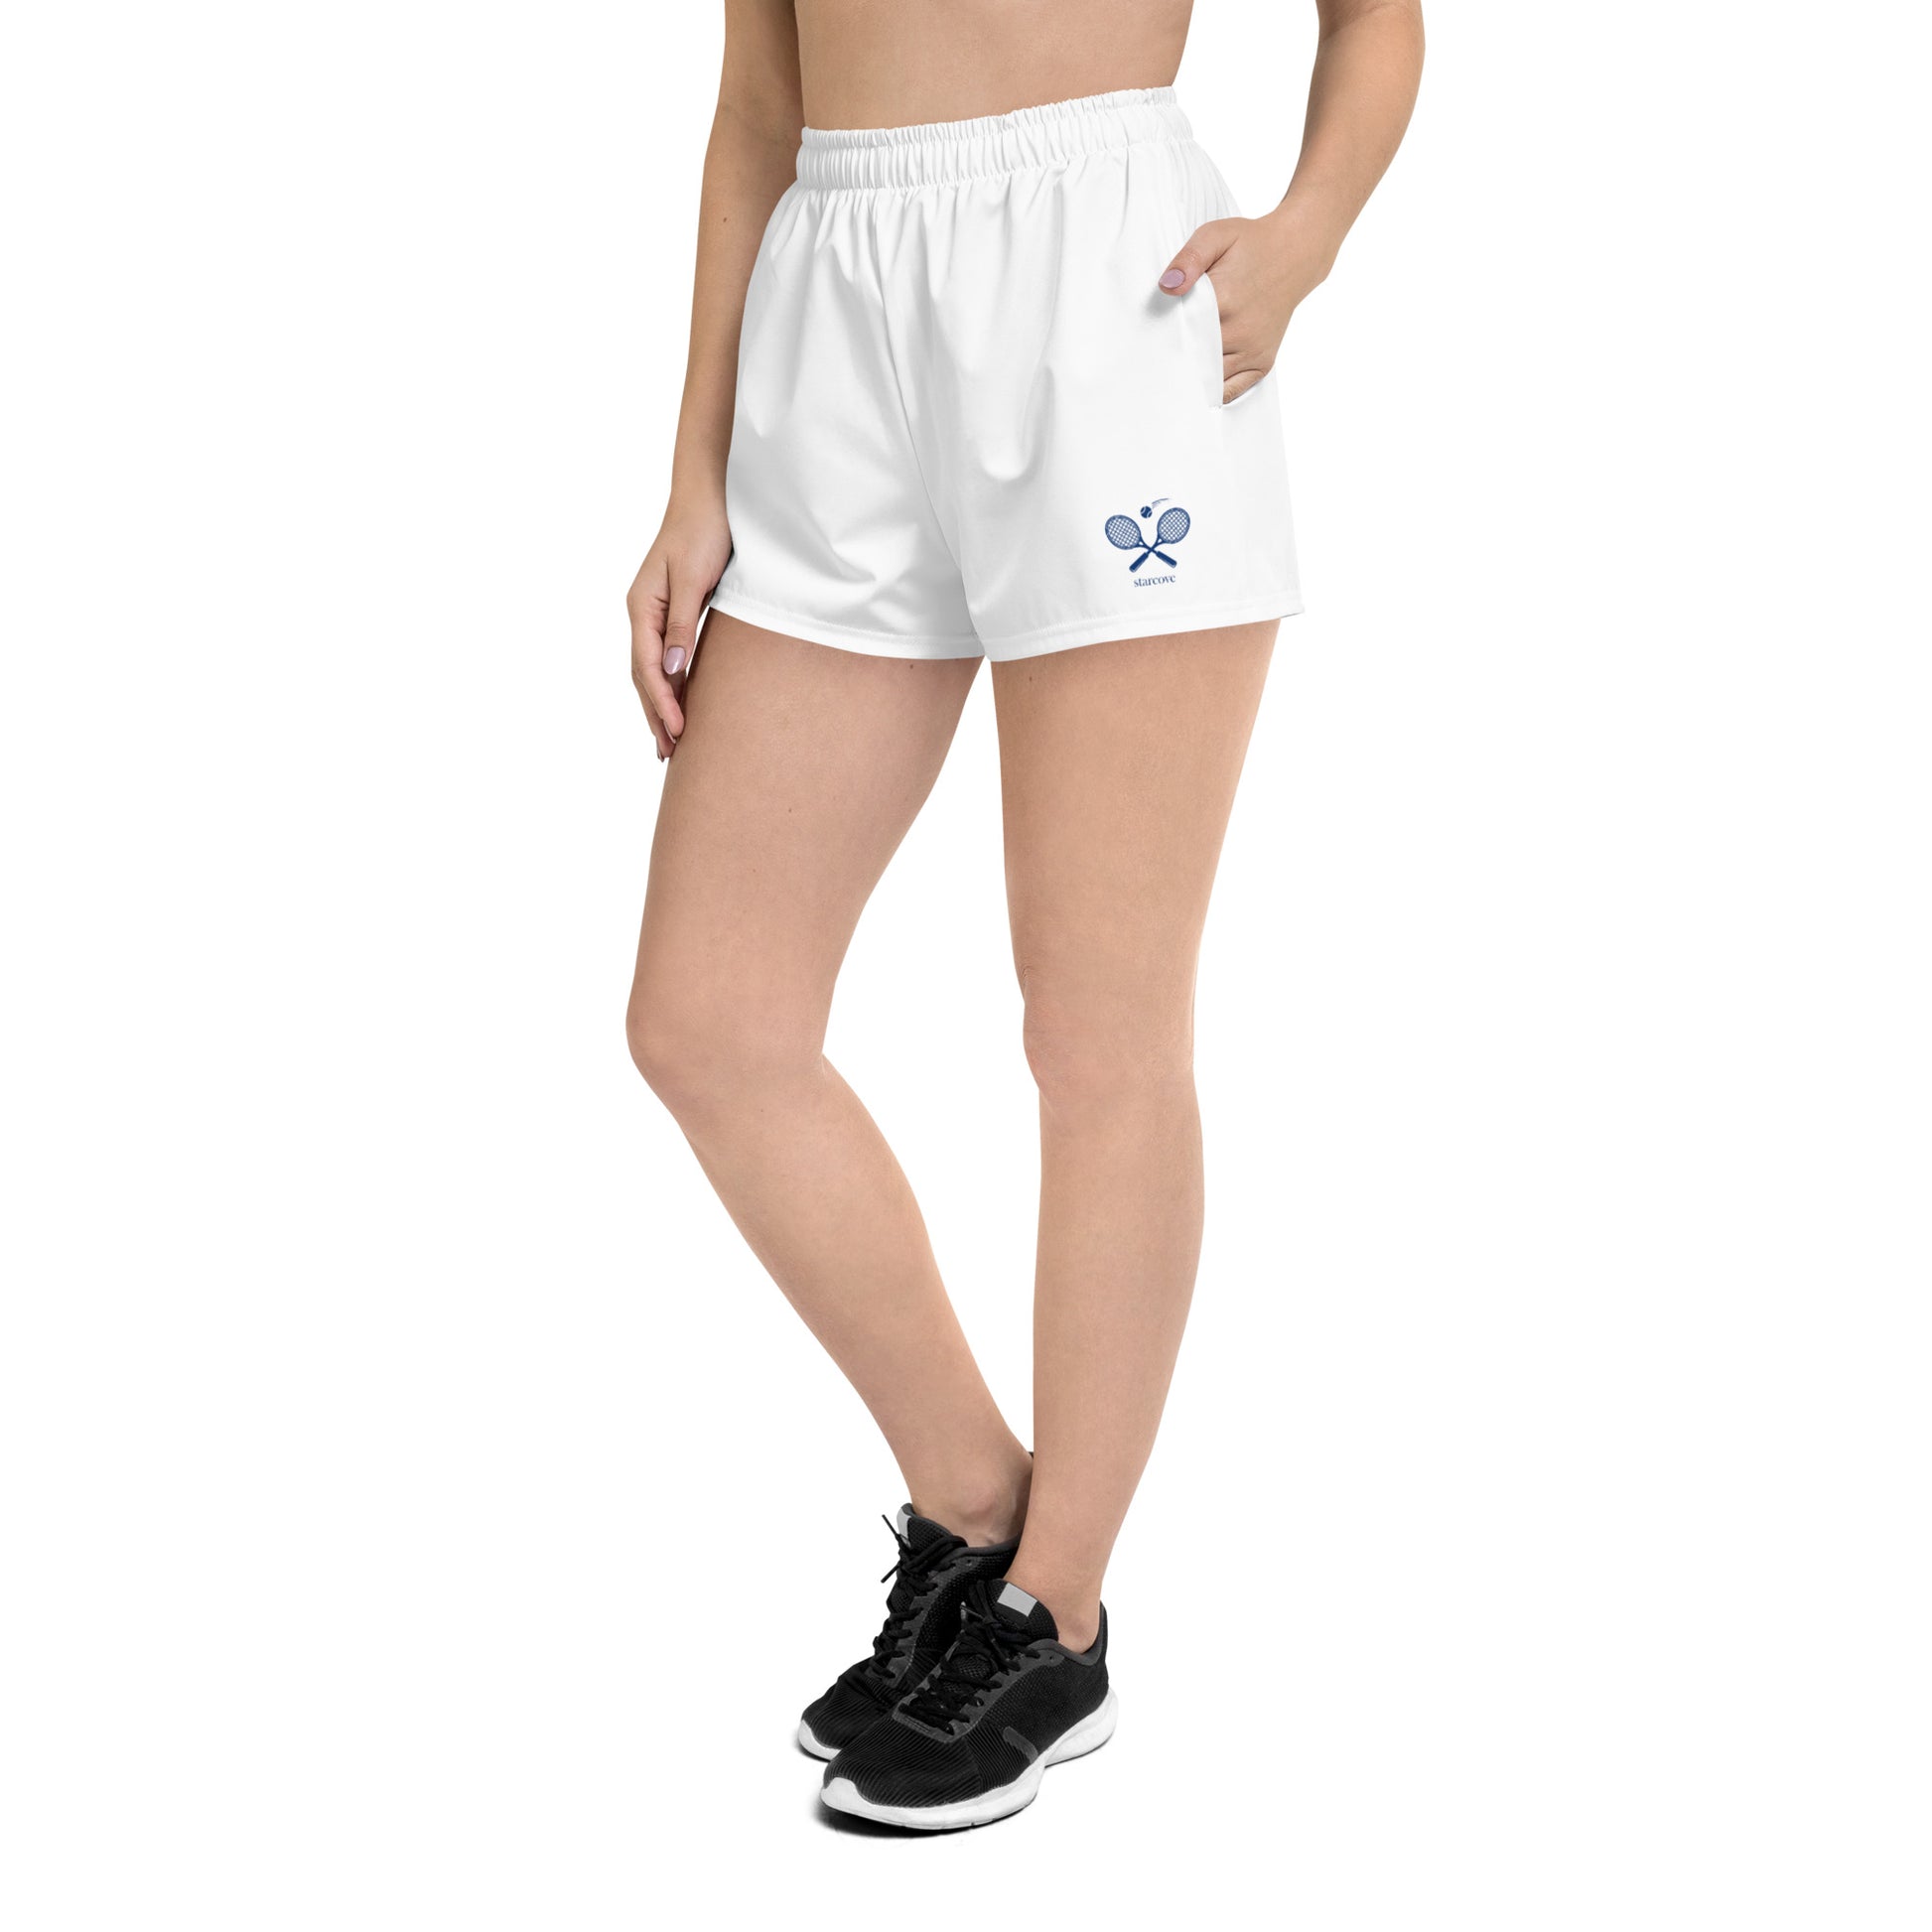 White Tennis Shorts Women with Ball Pockets, Athletic Vintage Retro Racket Racquets Sports Female Player Beach Outfit Ladies Gift Starcove Fashion